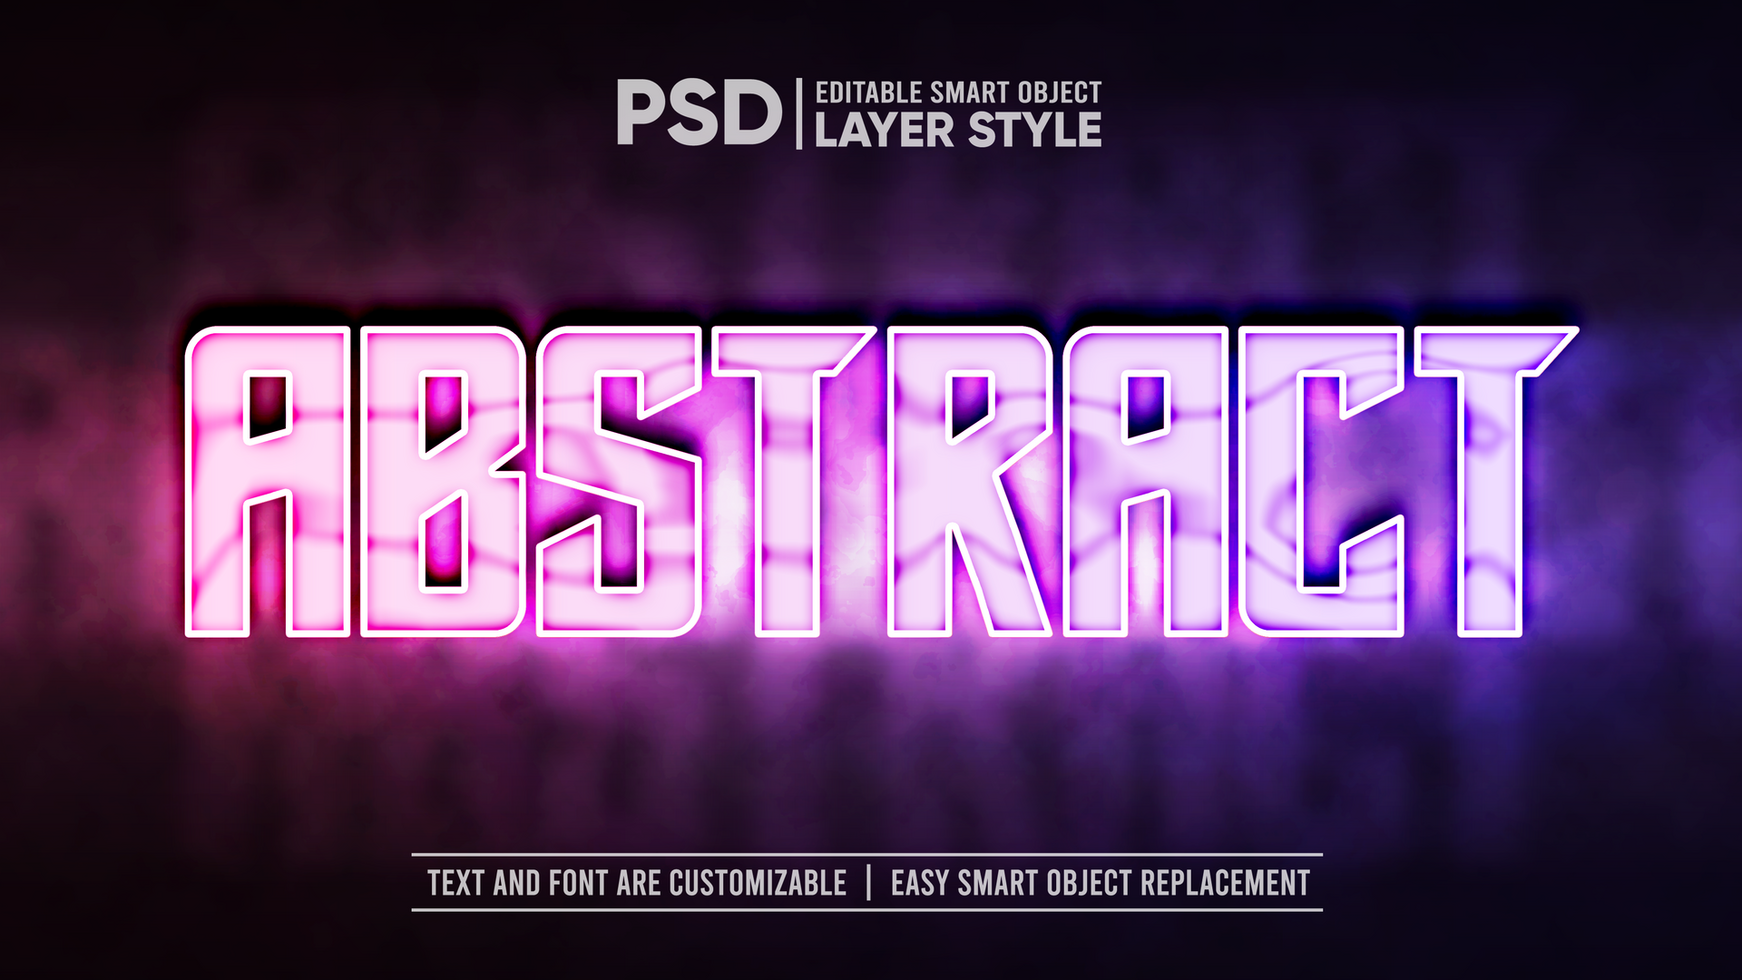 Abstract Glowing LED Light Lamp Editable Layer Style Smart Object Text Effect psd